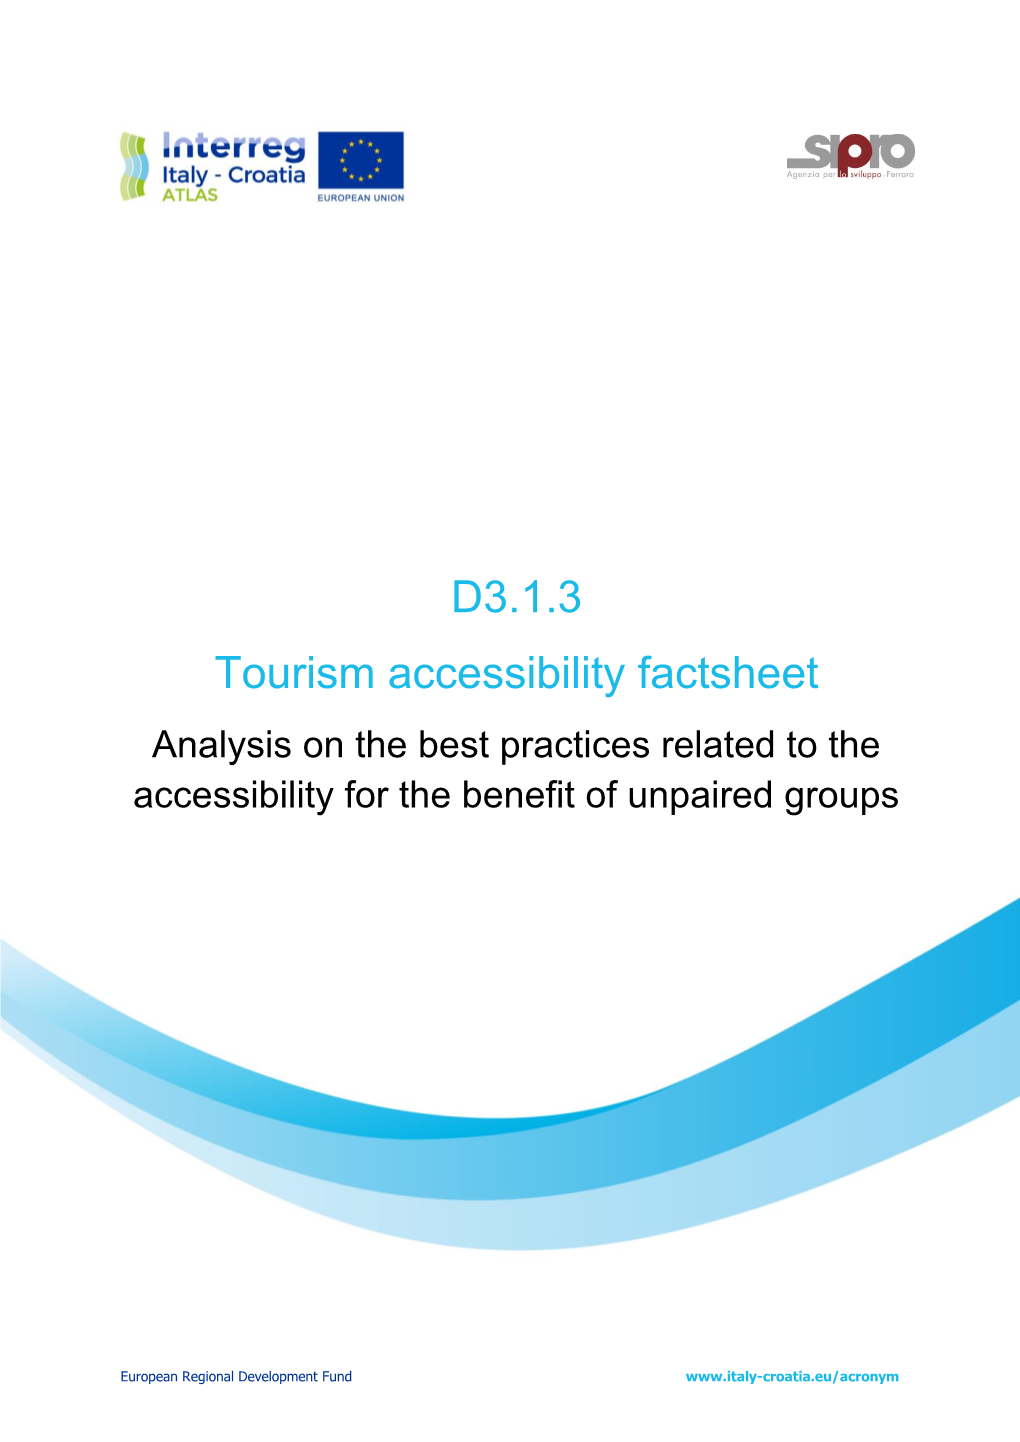 D3.1.3 Tourism Accessibility Factsheet Analysis on the Best Practices Related to the Accessibility for the Benefit of Unpaired Groups